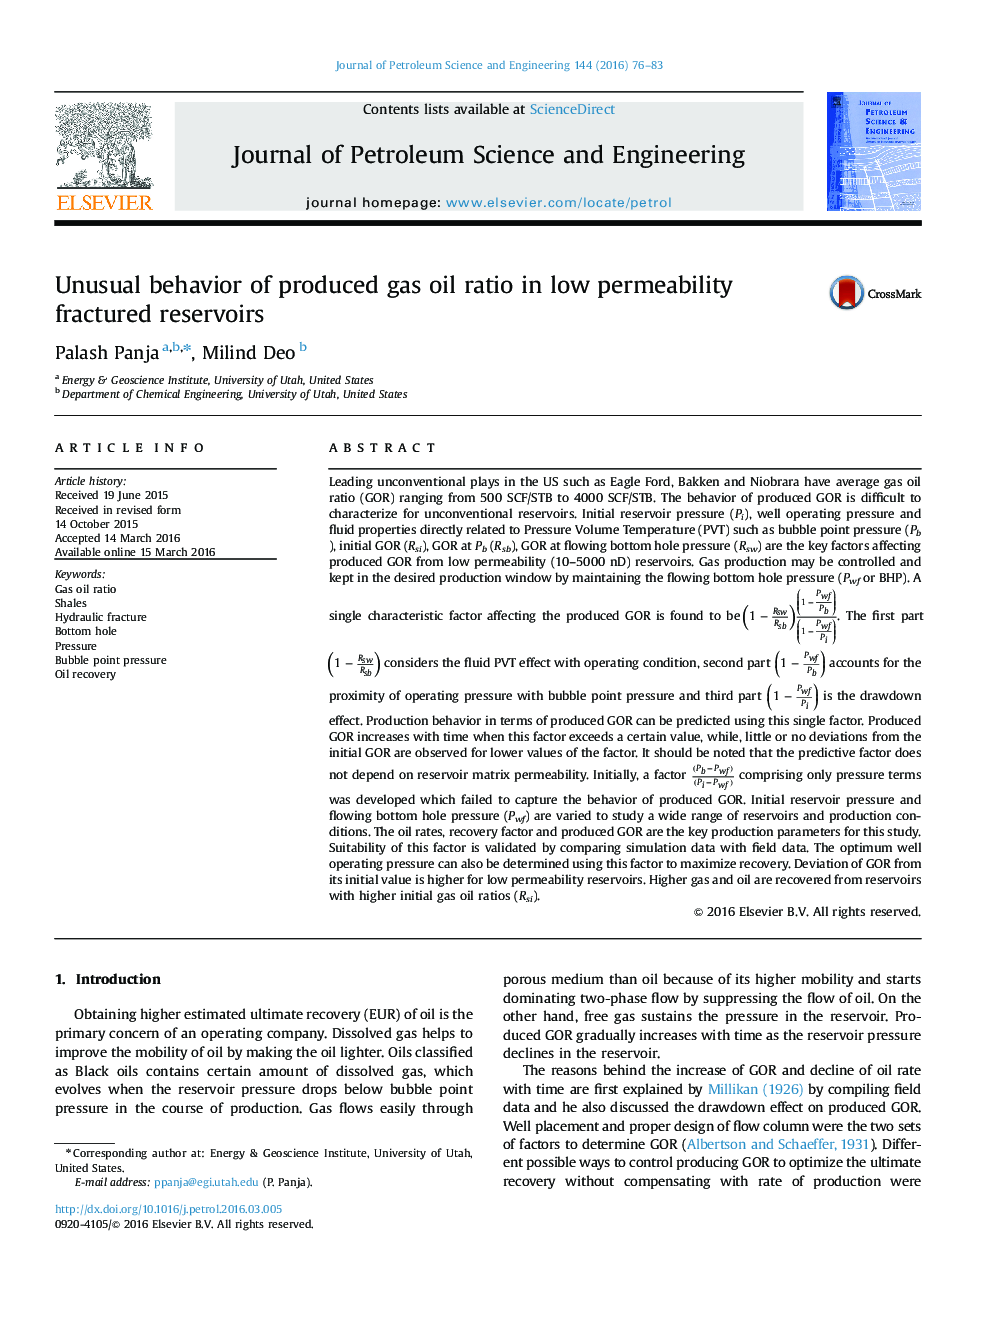 Unusual behavior of produced gas oil ratio in low permeability fractured reservoirs